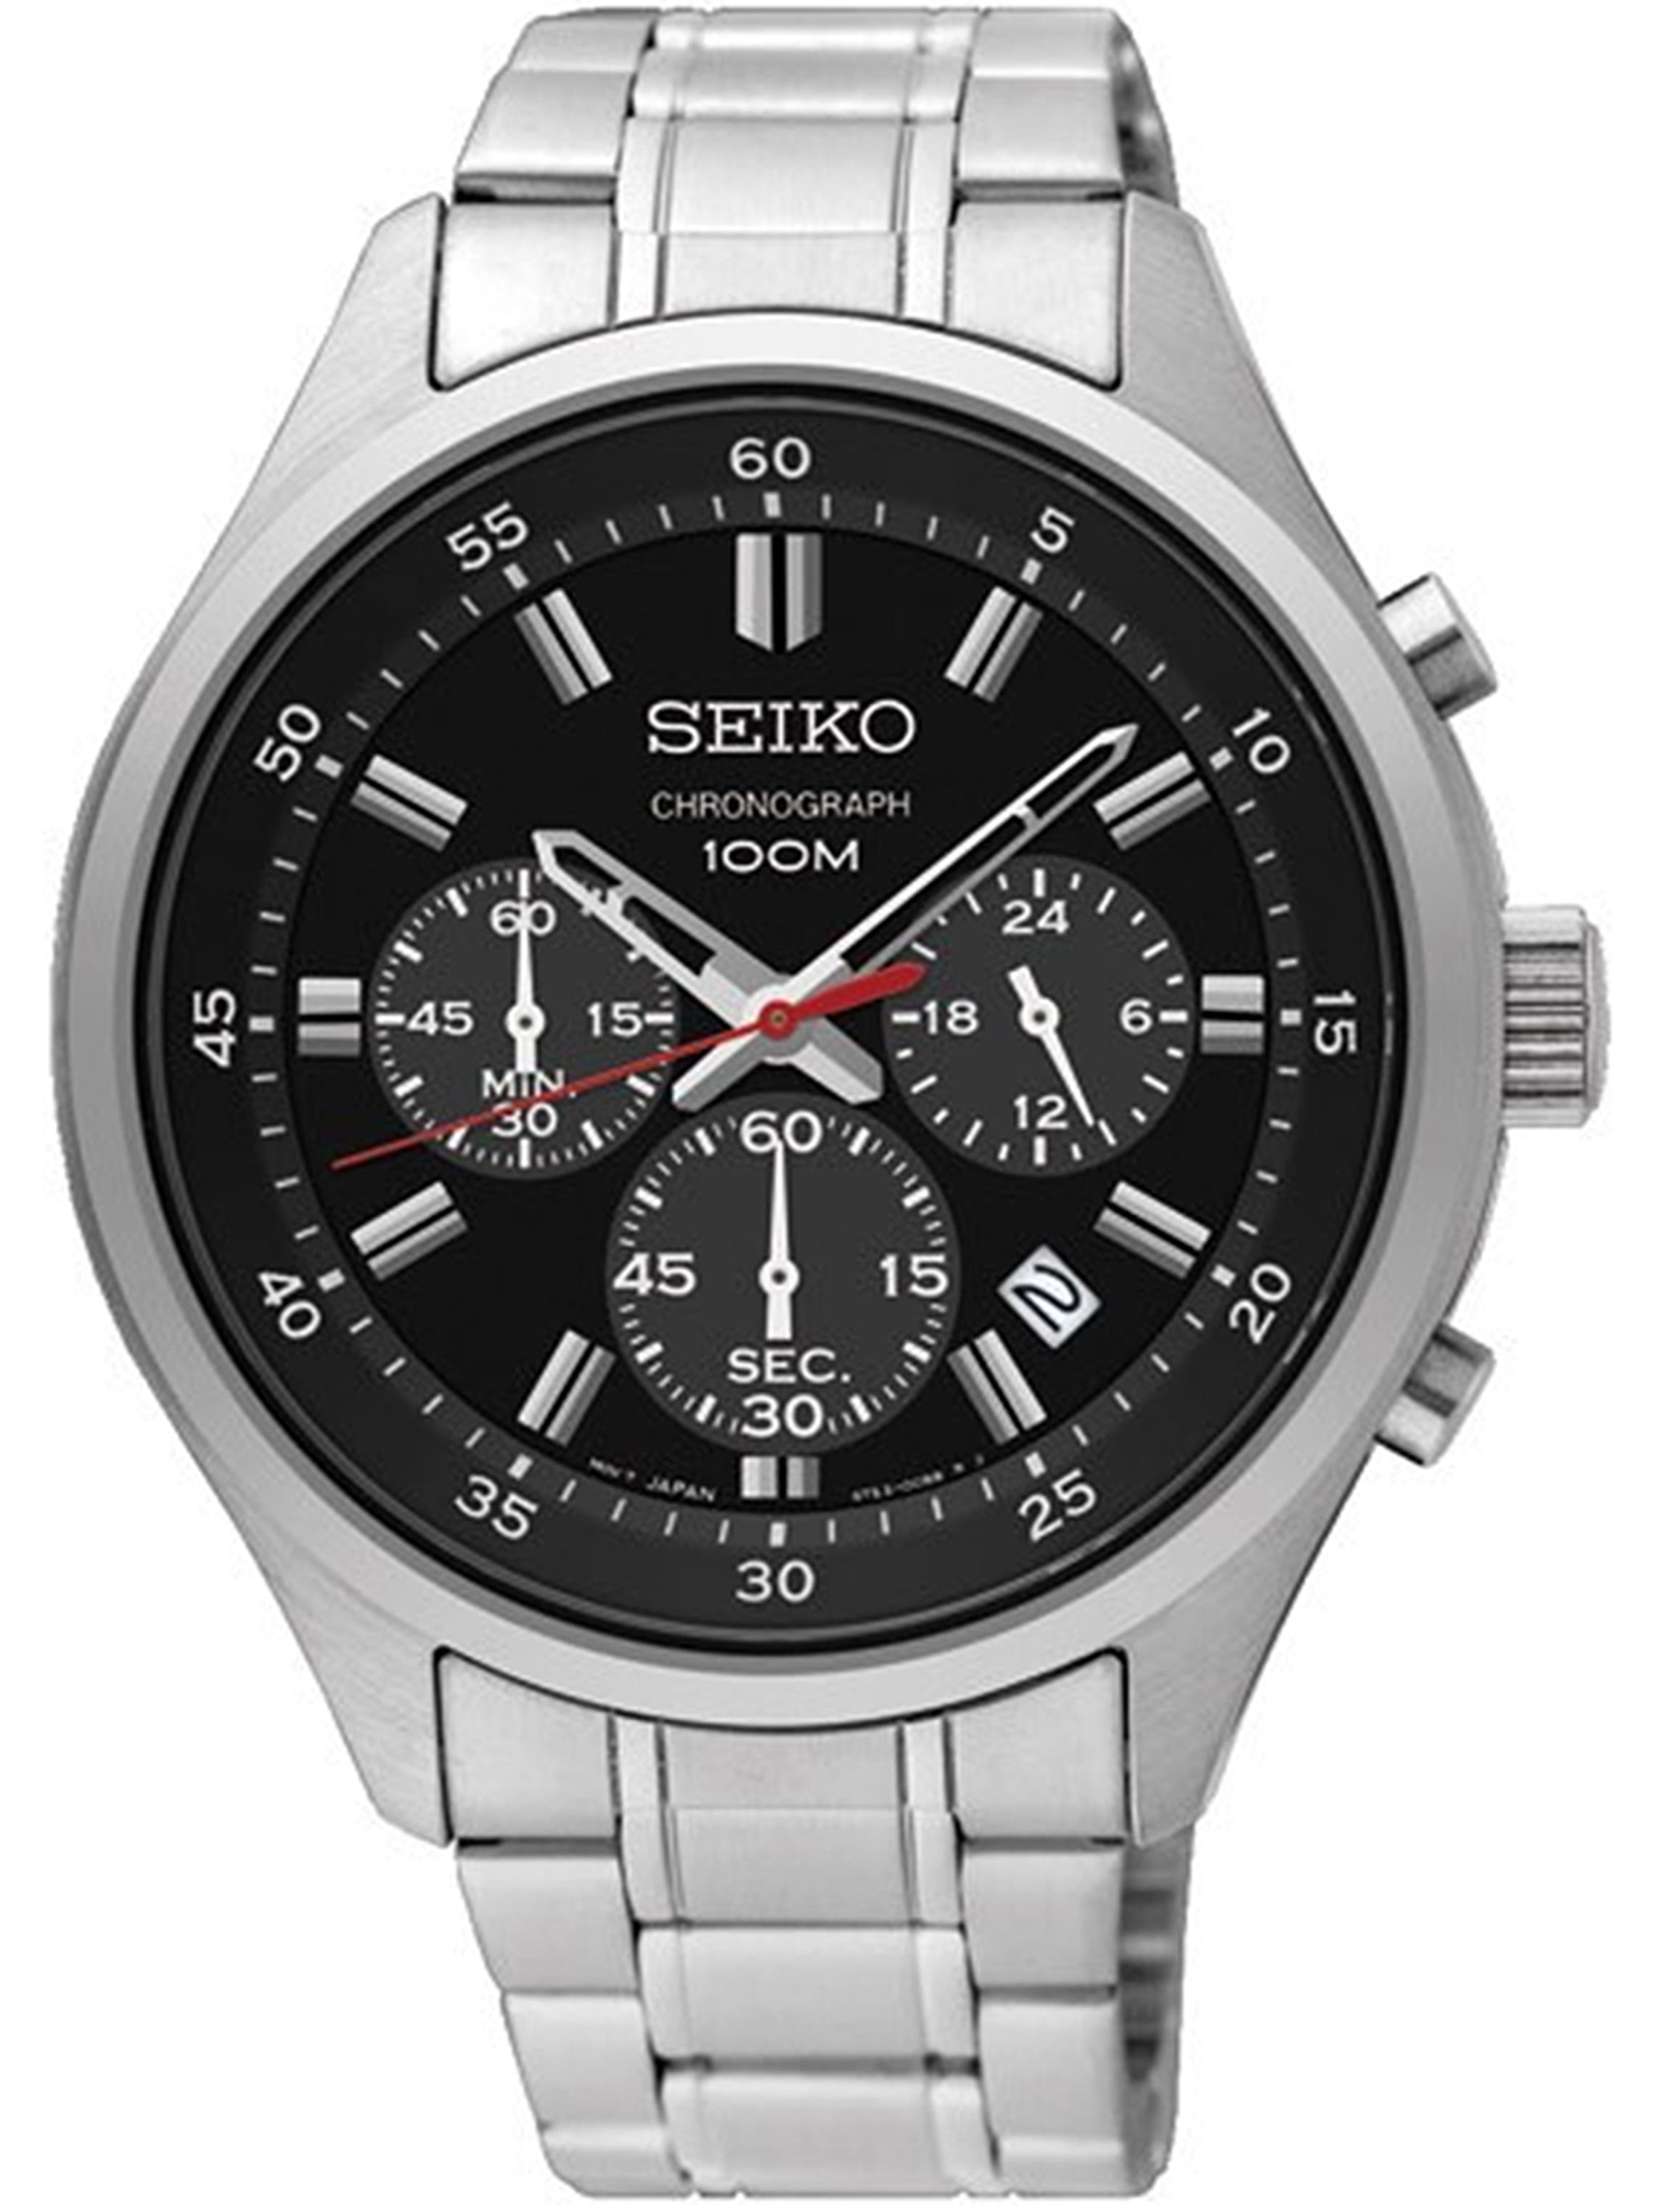 Seiko Men's SKS587P1, Chronograph,stainless steel case and  bracelert,date,100m WR,SKS587 